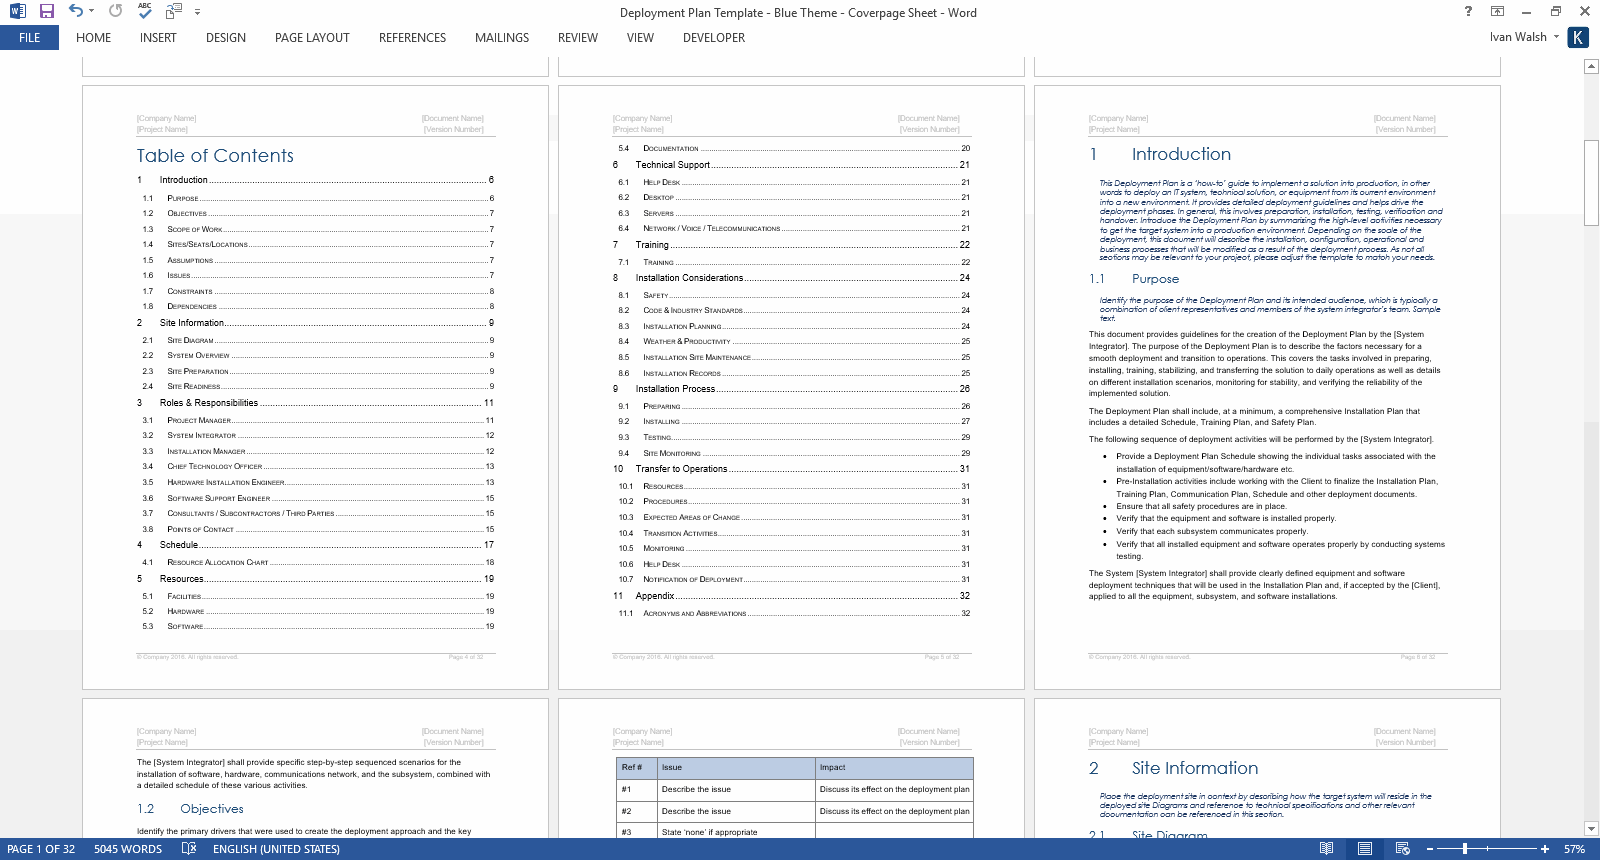 Deployment Plan Template (MS Word) Templates, Forms, Checklists for